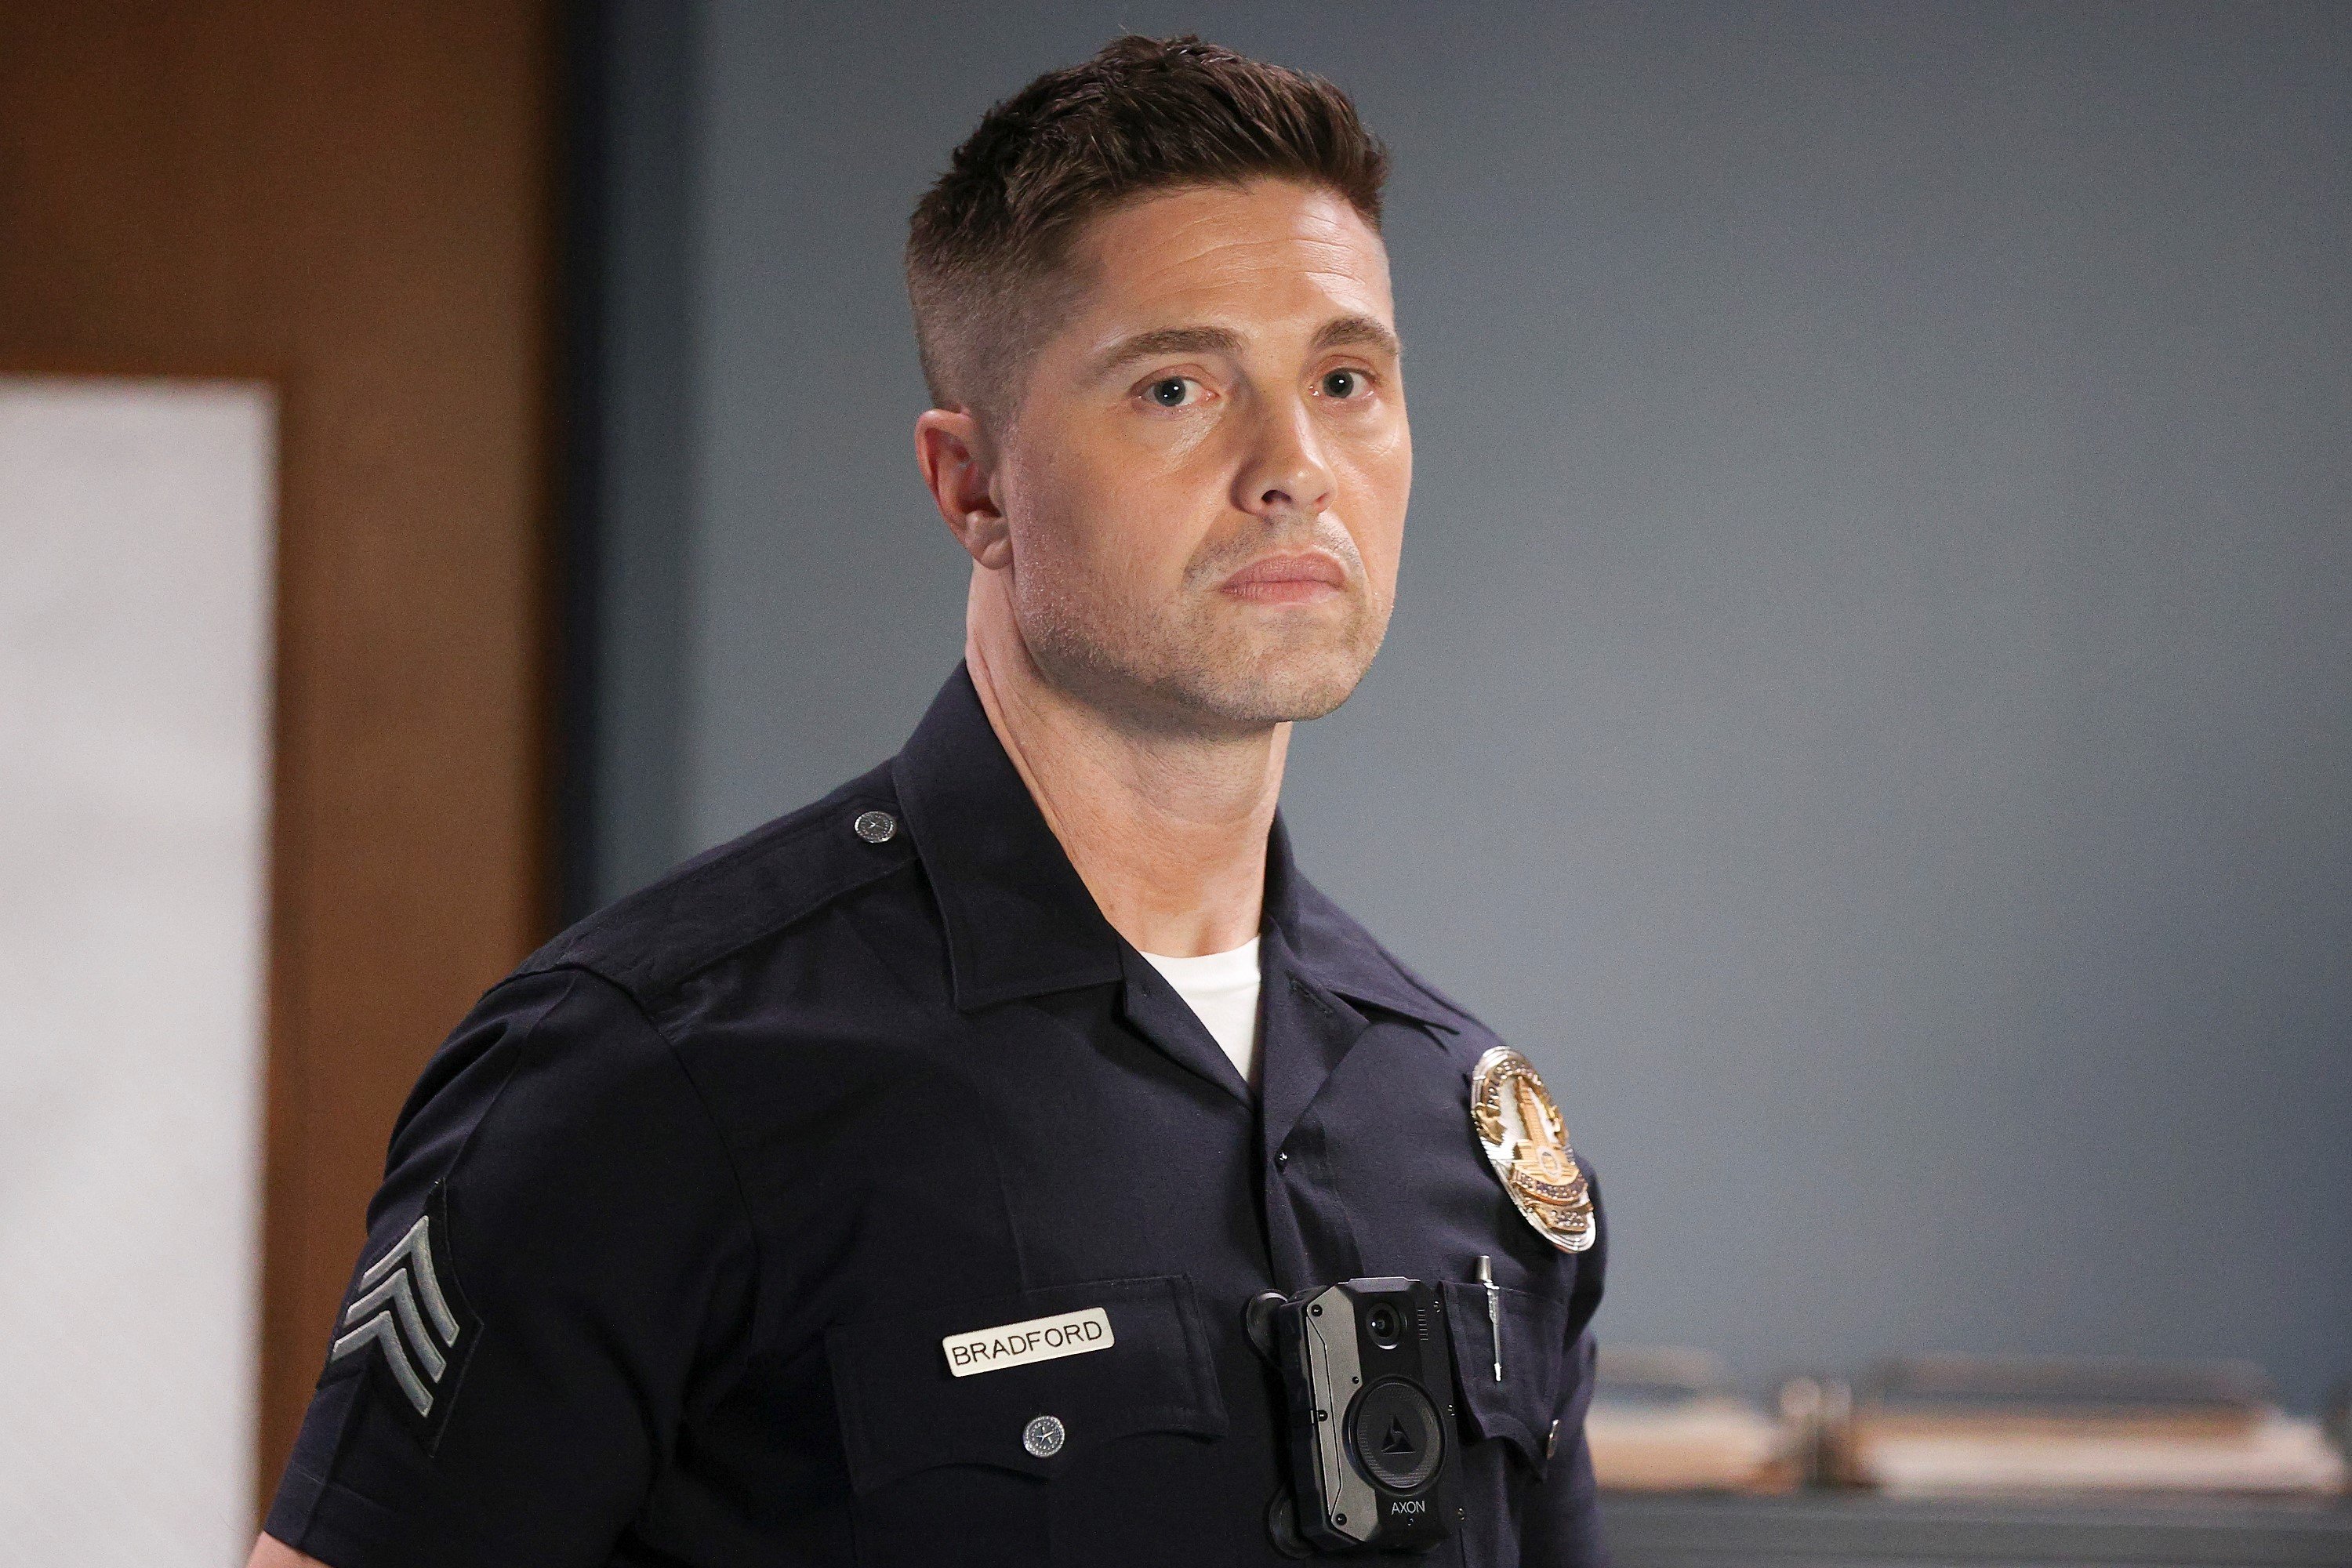 Eric Winter as Tim Bradford, who recently joined Metro, in 'The Rookie' on ABC. Tim wears his dark blue police uniform.